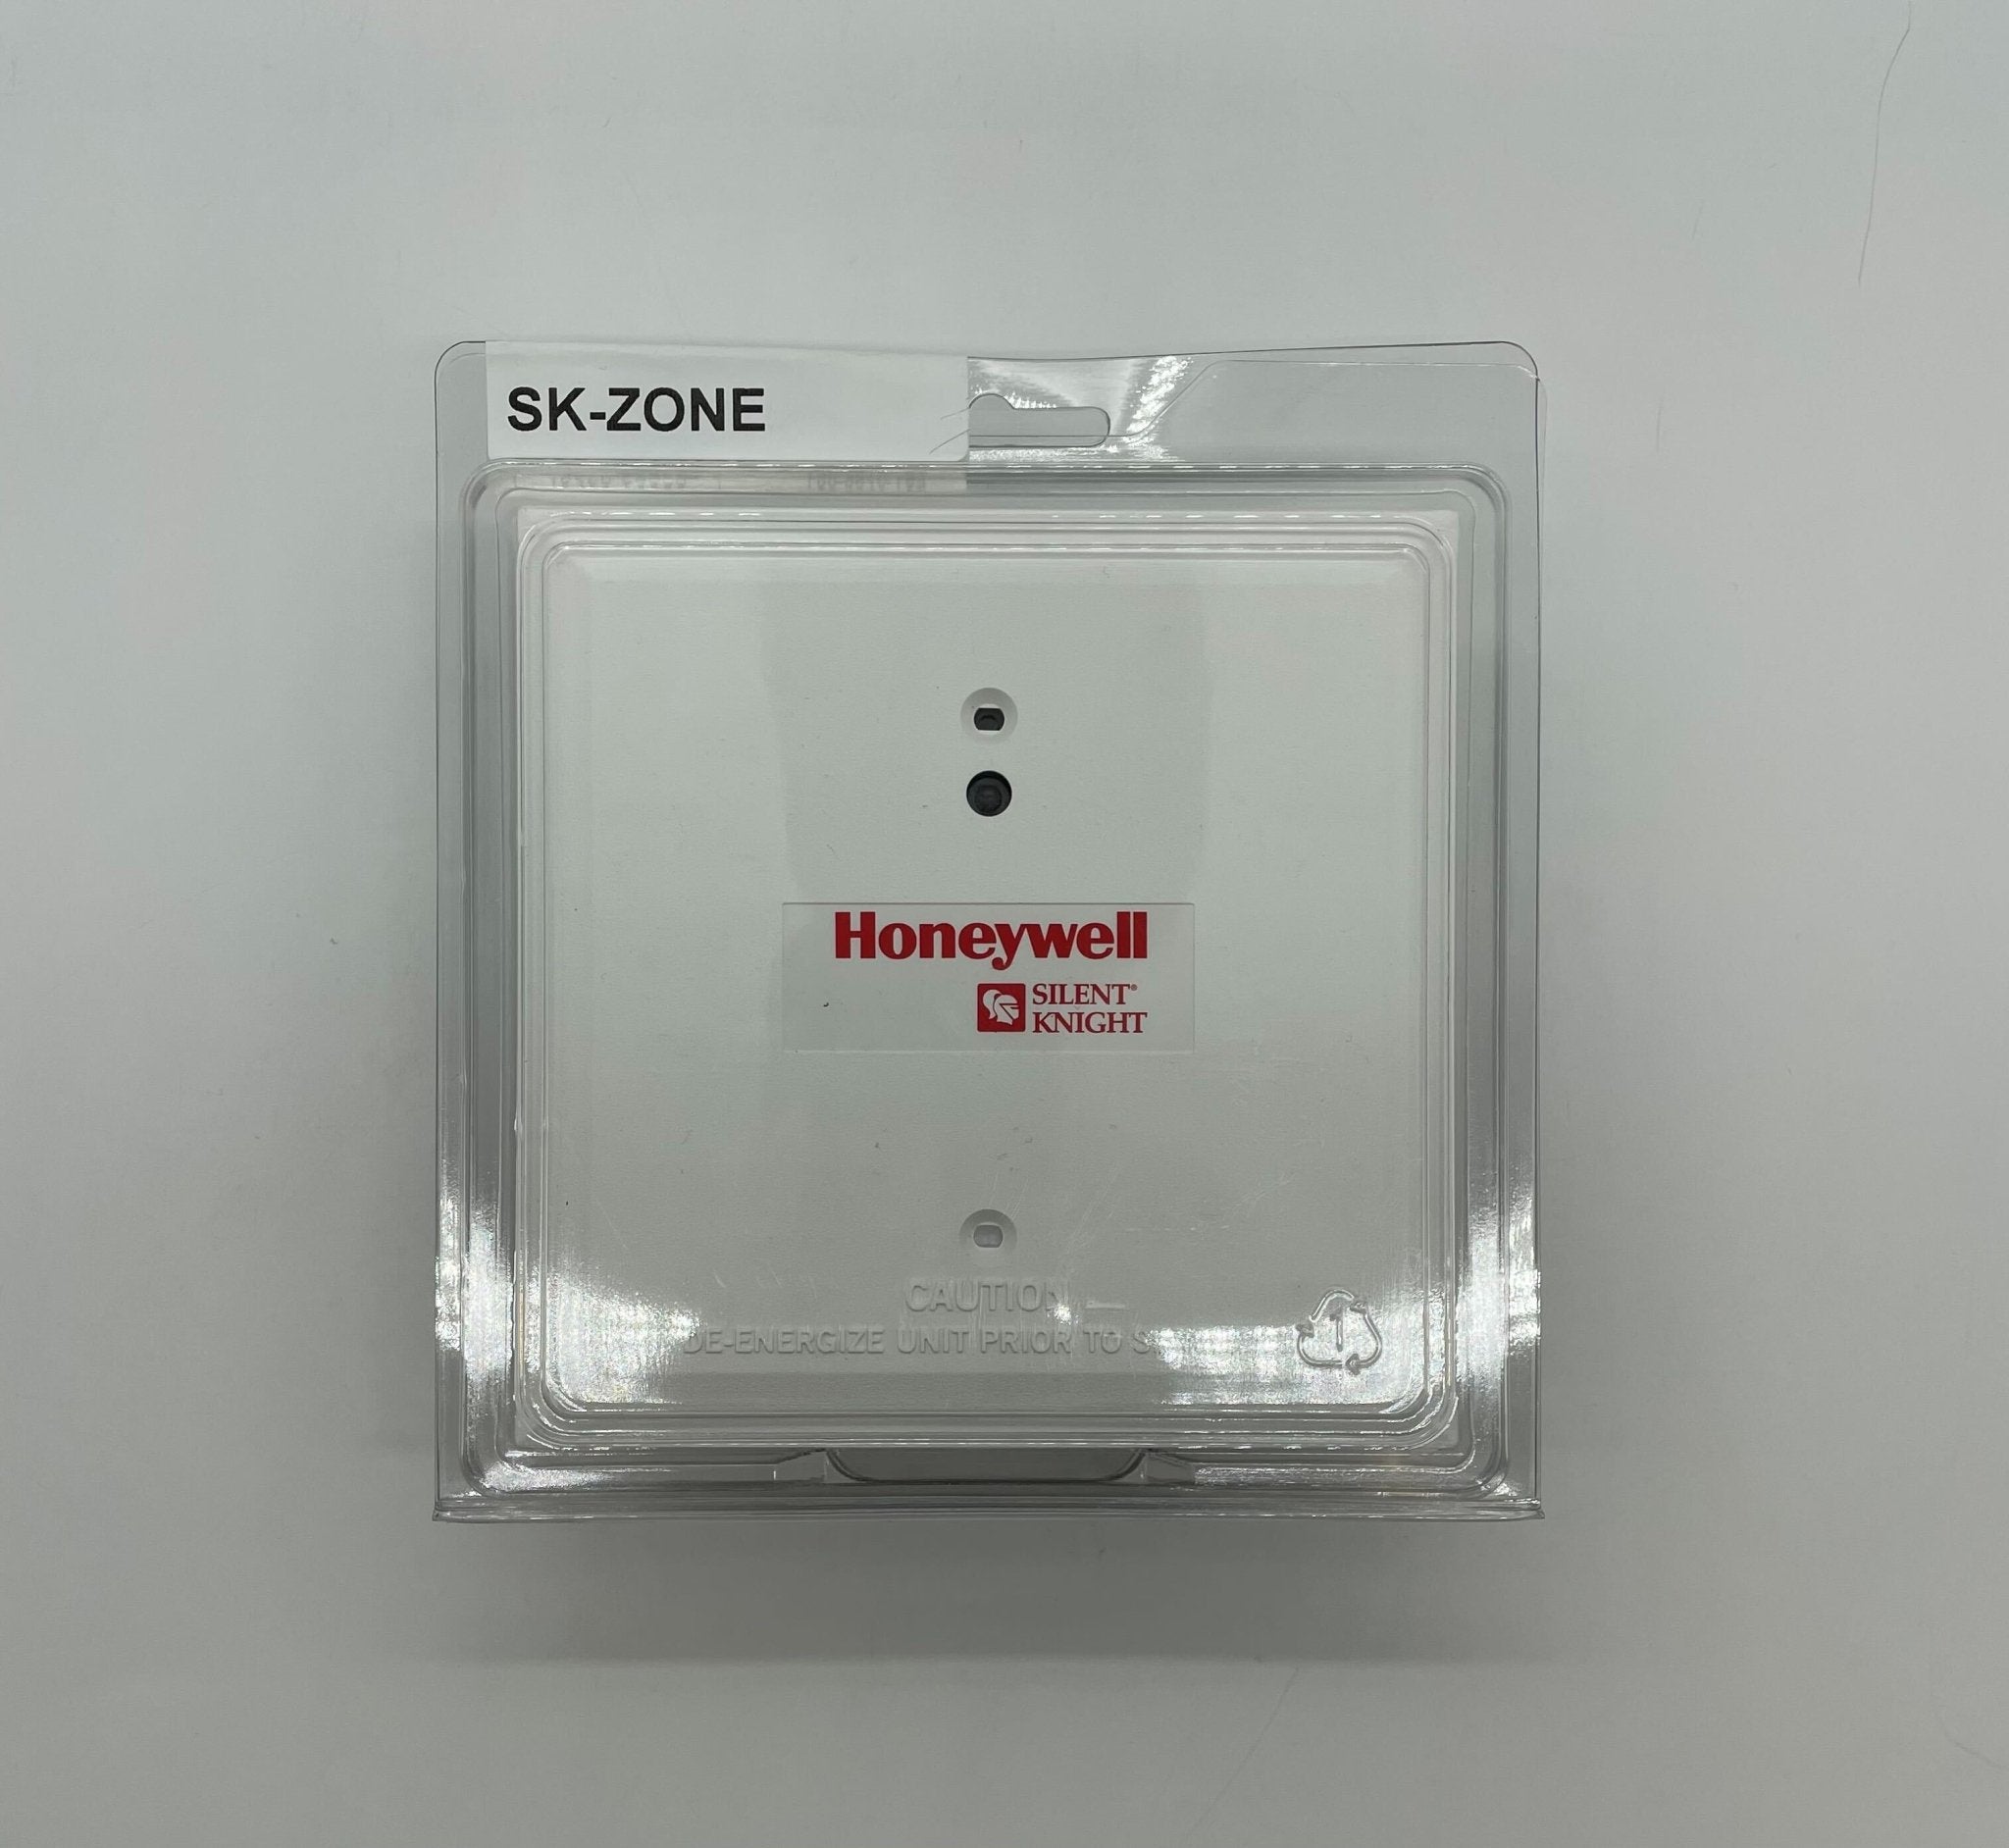 Silent Knight SK-ZONE - The Fire Alarm Supplier